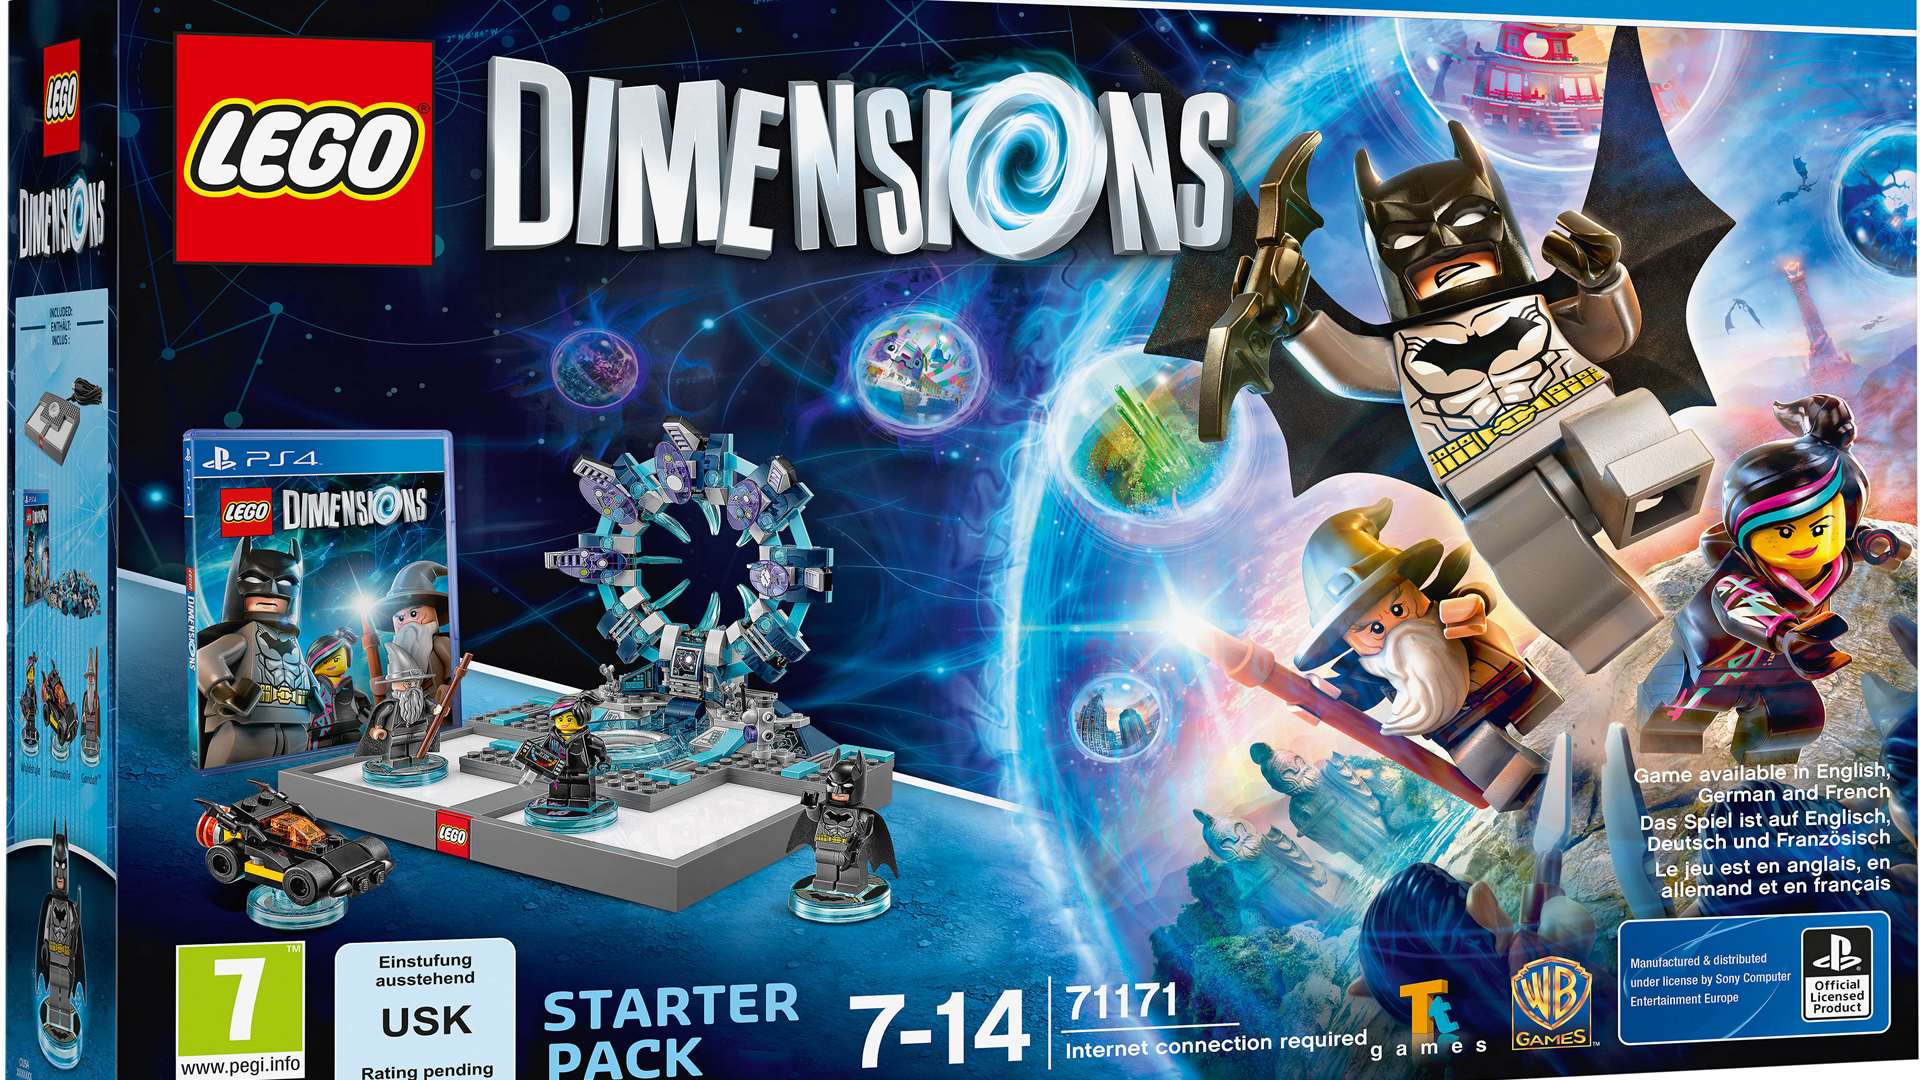 FOR THEM: One of this year’s must-have gifts for the under 14s. Help Batman, Gandalf and Wyldstyle help save the world with the Lego Starter Pack. Compatible with the PS4. £99.99 from Argos